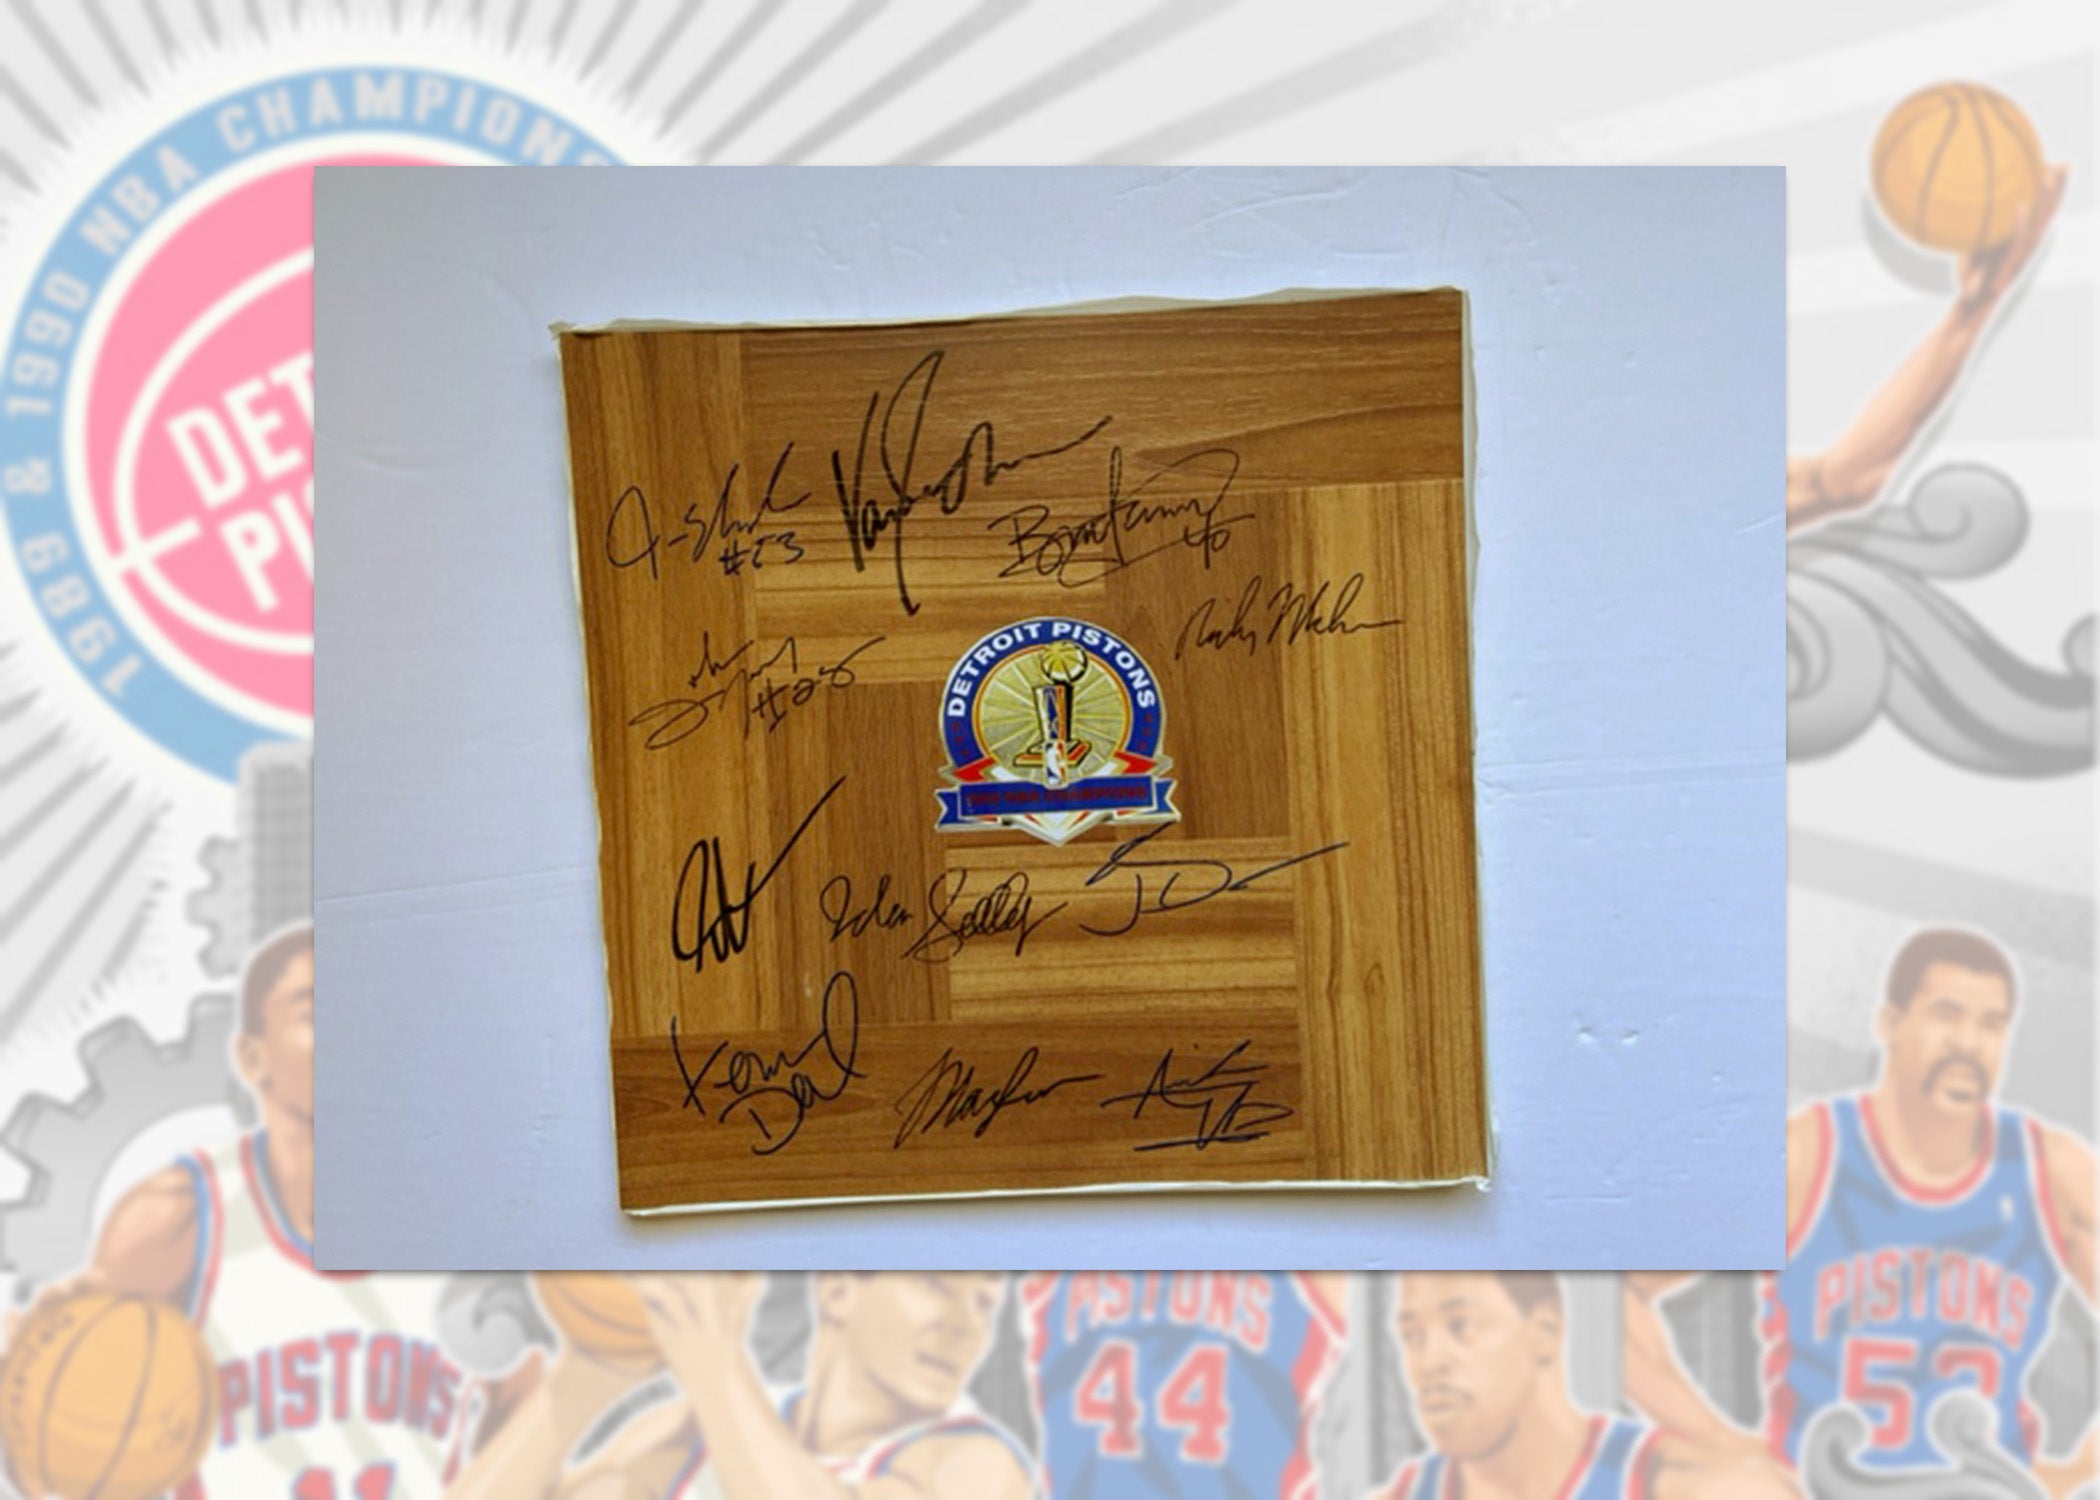 Detroit Pistons 1988-1989 NBA Champ 12x12 parquet wood floorboard signed with proof